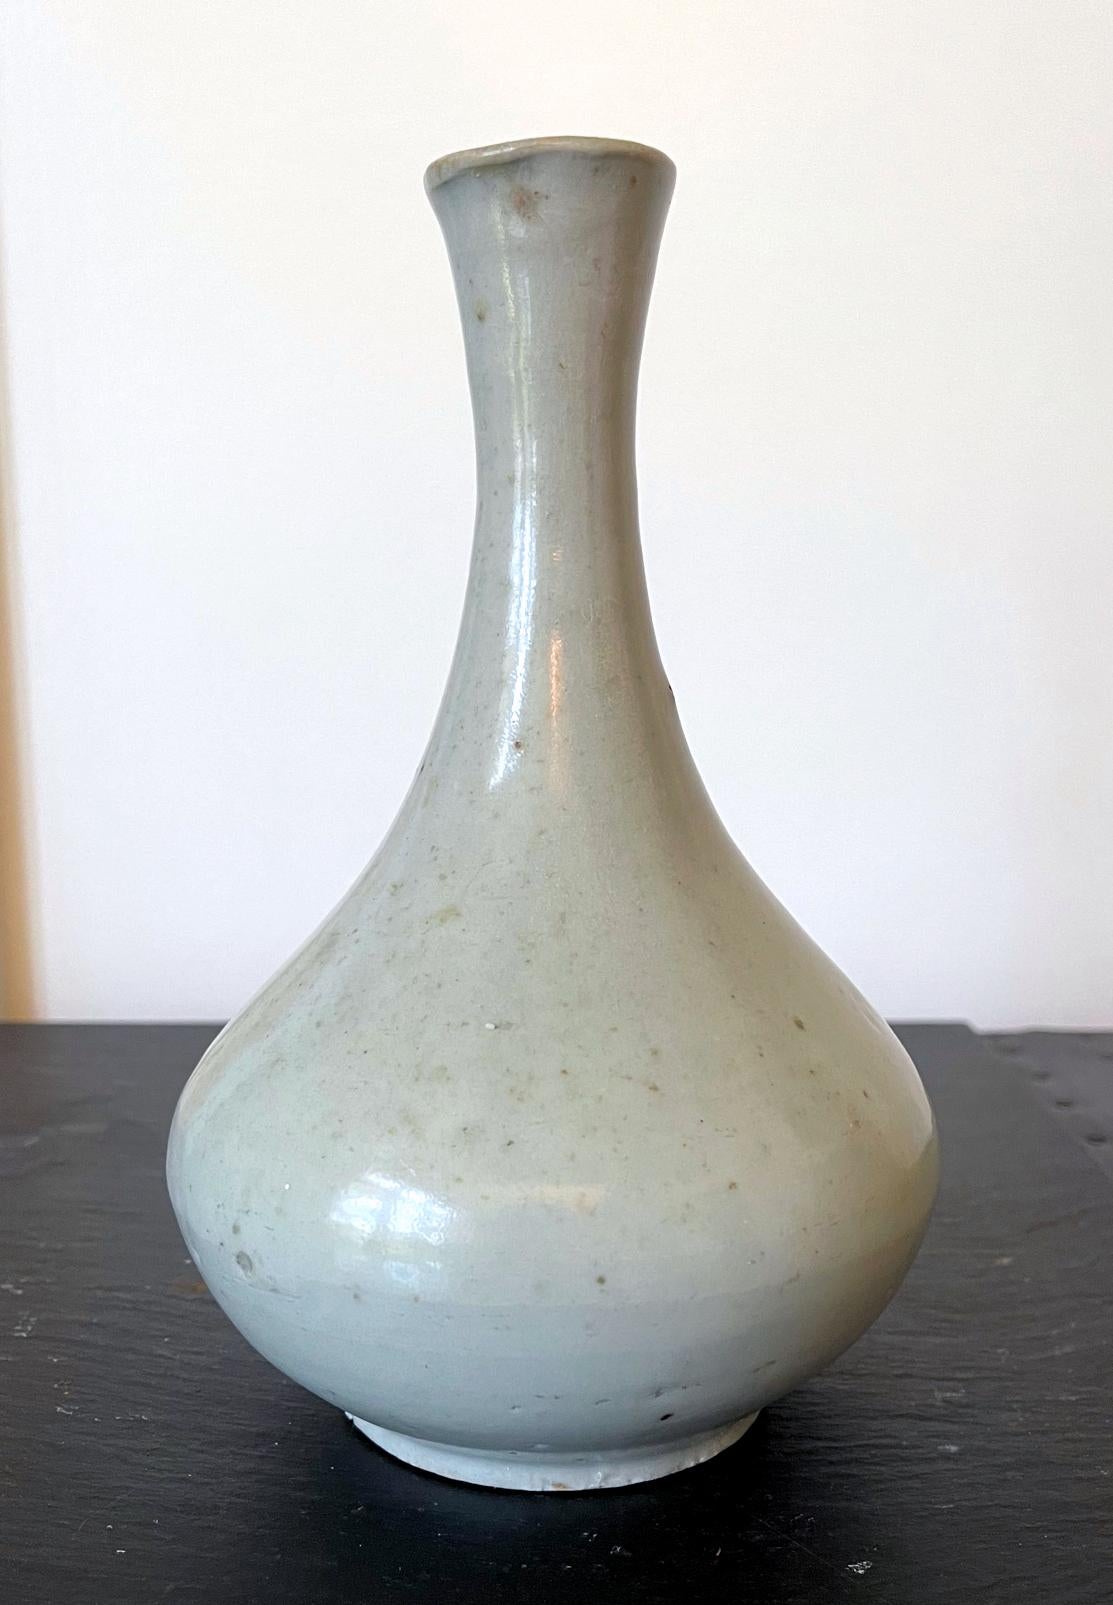 A Korean ceramic bottle vase circa 19th century late Joseon Dynasty (1392-1910), he smallest one in our the three bottles in our collection. The vase is of a classic bottle form with a bulbous body and a long neck with a slightly rolled mouth rum.